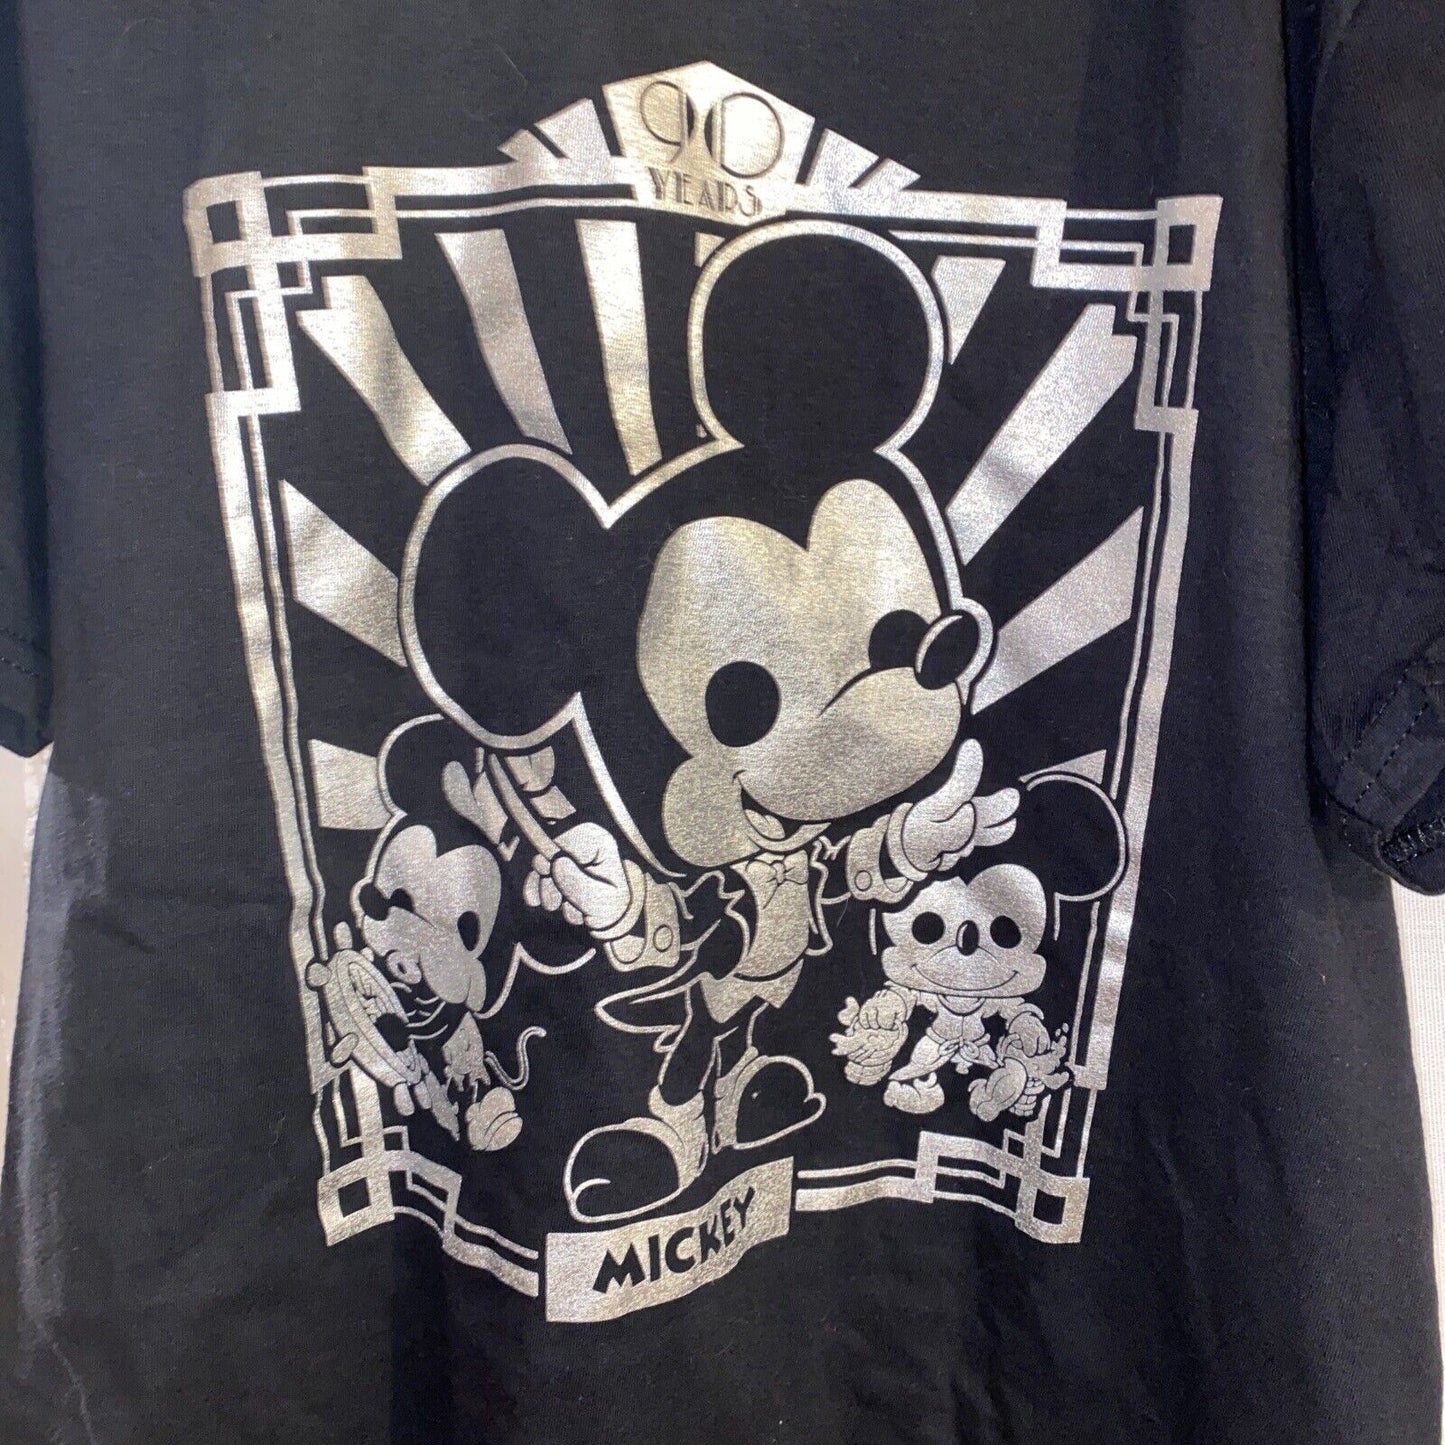 Funko POP! Tees Disney Mickey Mouse 90 Years Short Sleeve Tshirt Only (Black) Size S